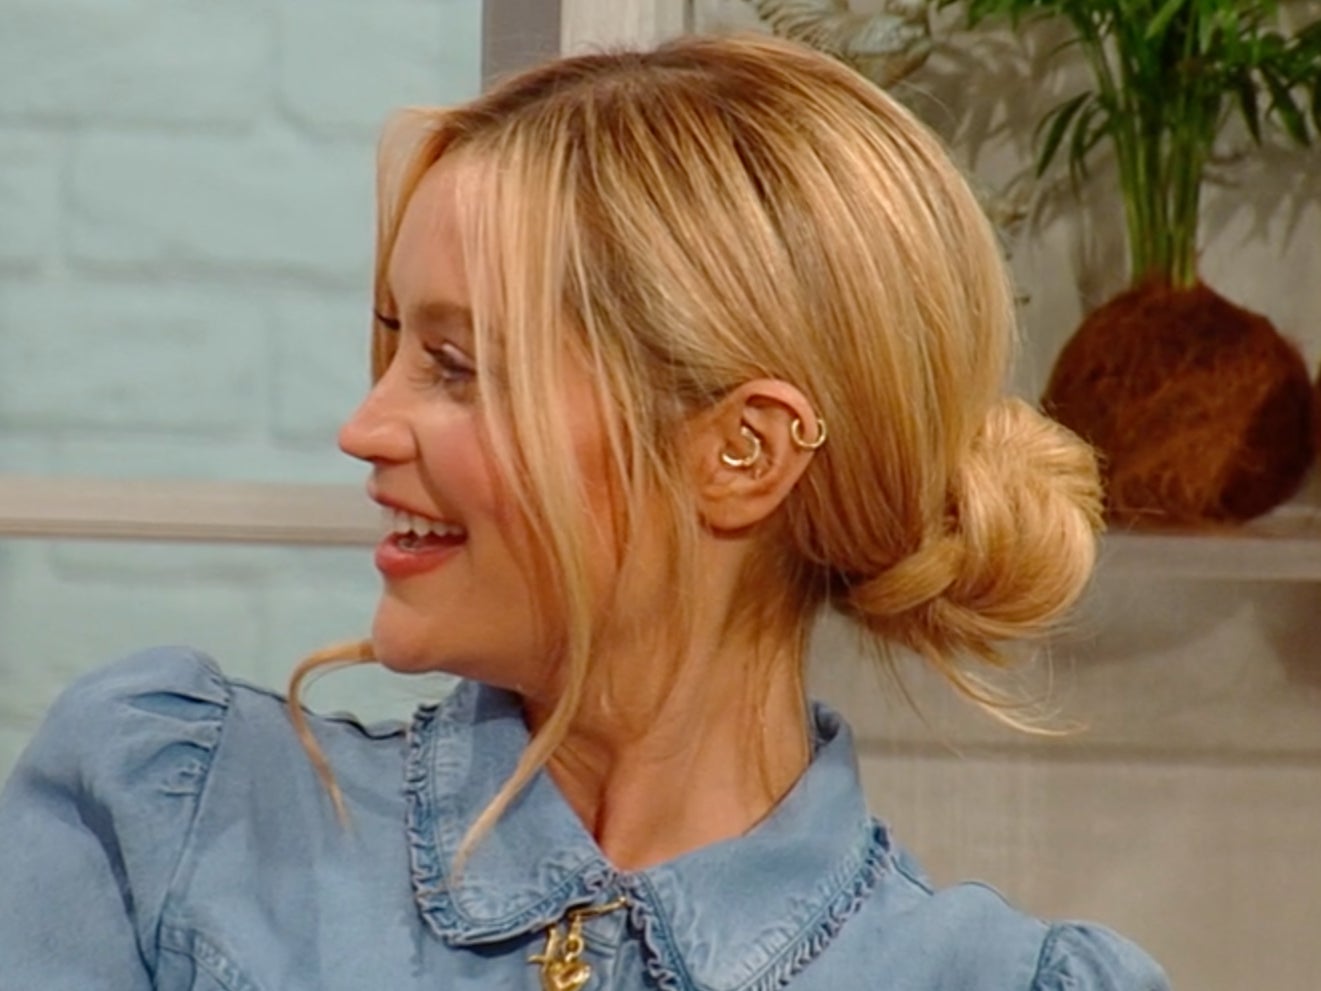 Laura Whitmore was surprised after being corrected on ‘Saturday Kitchen’